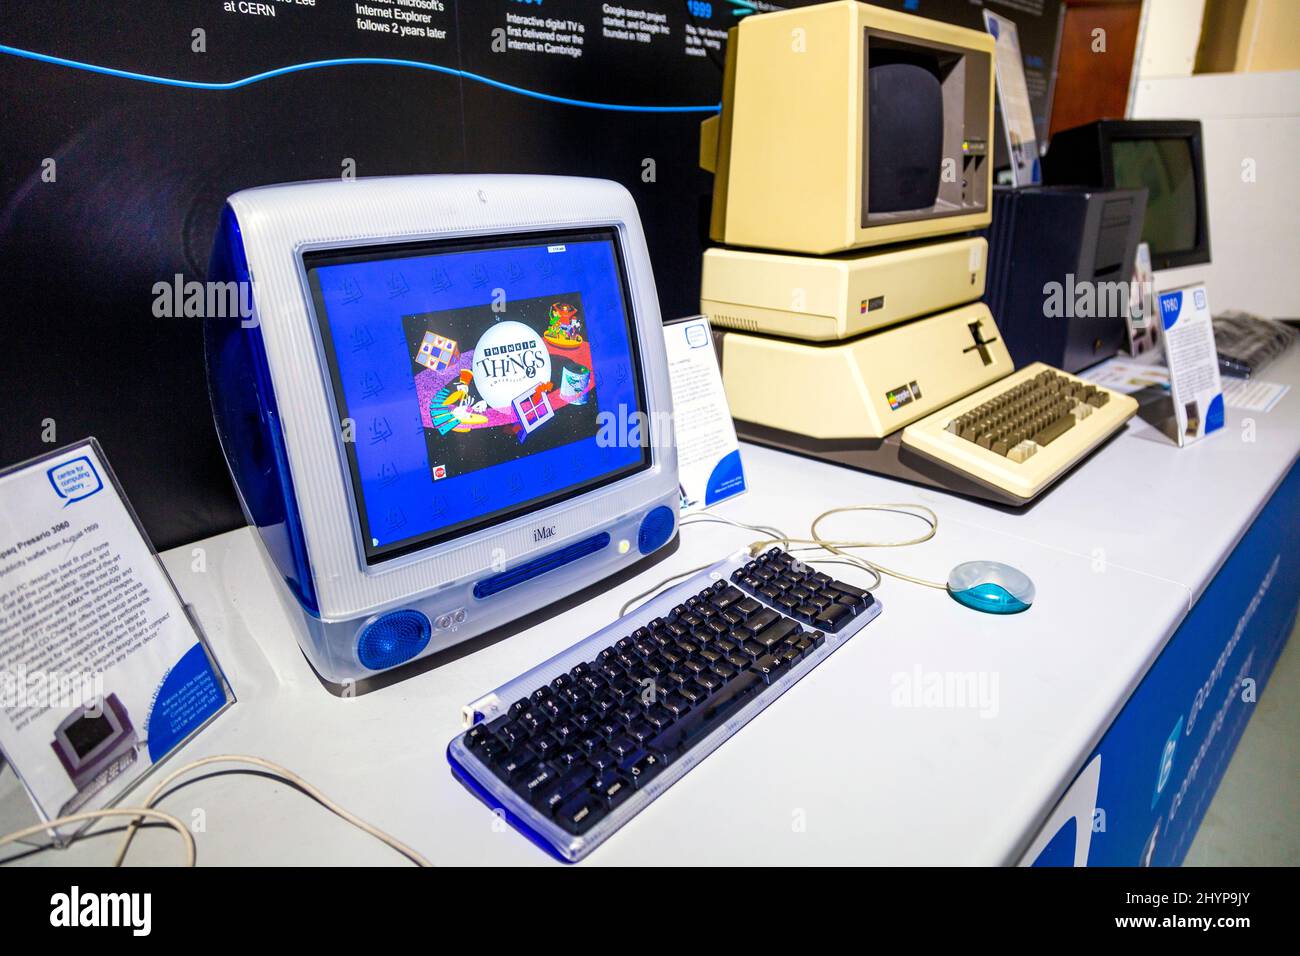 Retro 1990s iMac G3 computer on display at the Centre for Computing History, Cambridge, UK Stock Photo